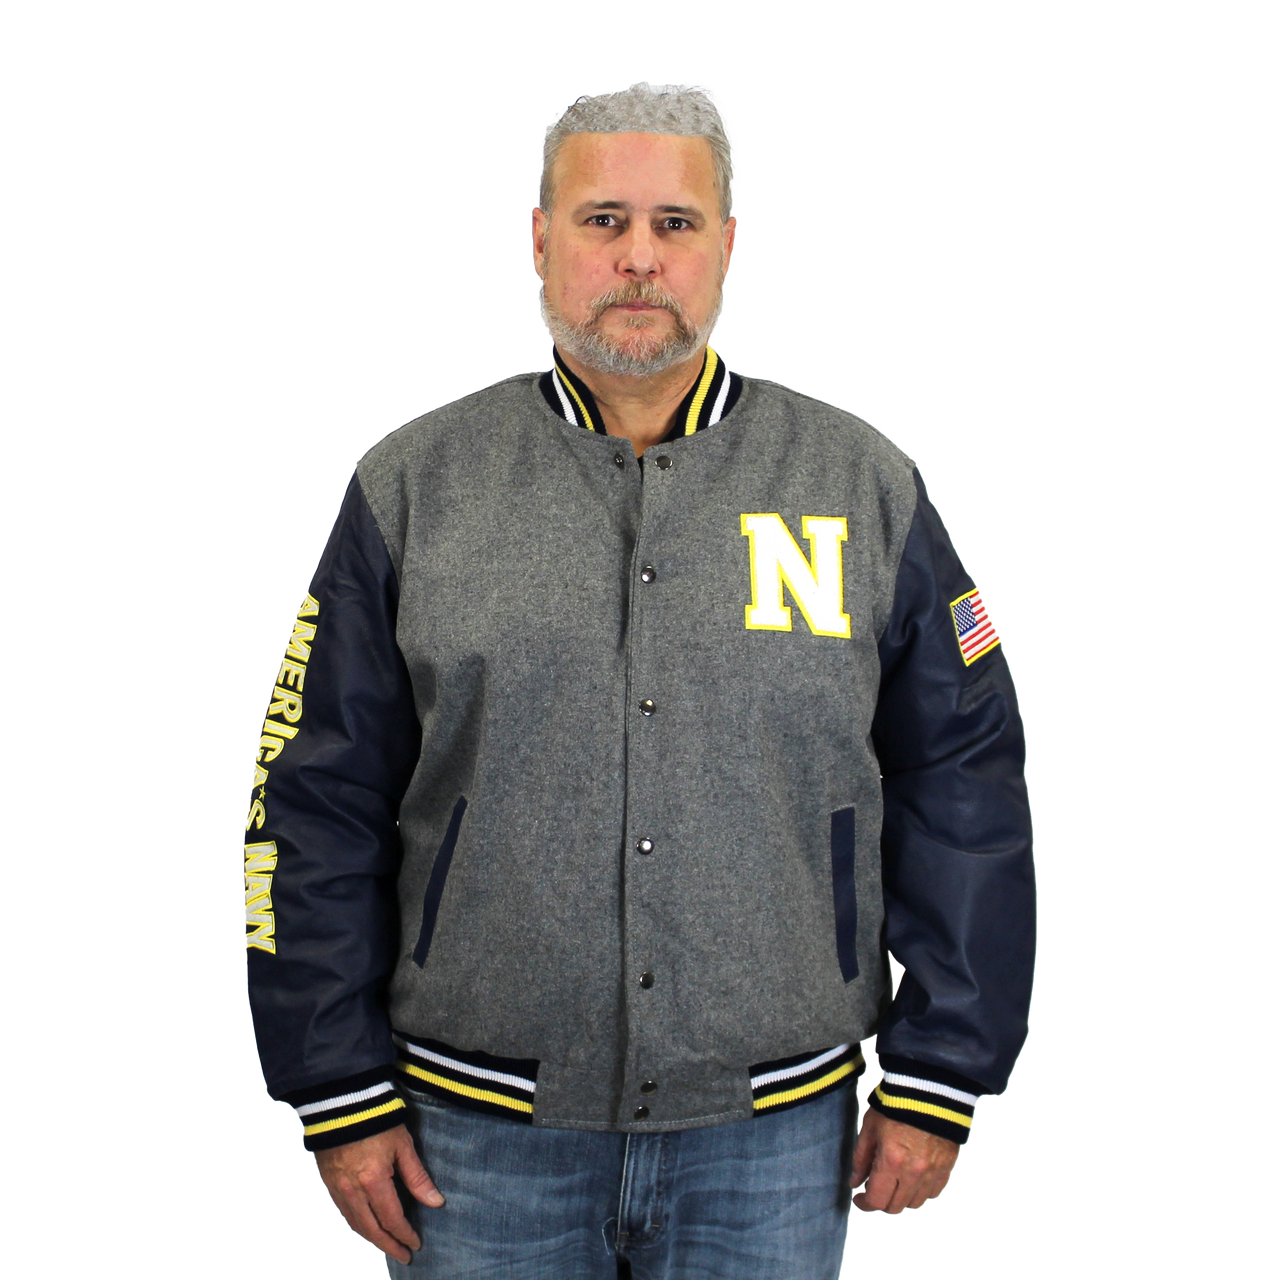 NEW YORK YANKEES TWO-TONE WOOL AND LEATHER JACKET - NAVY